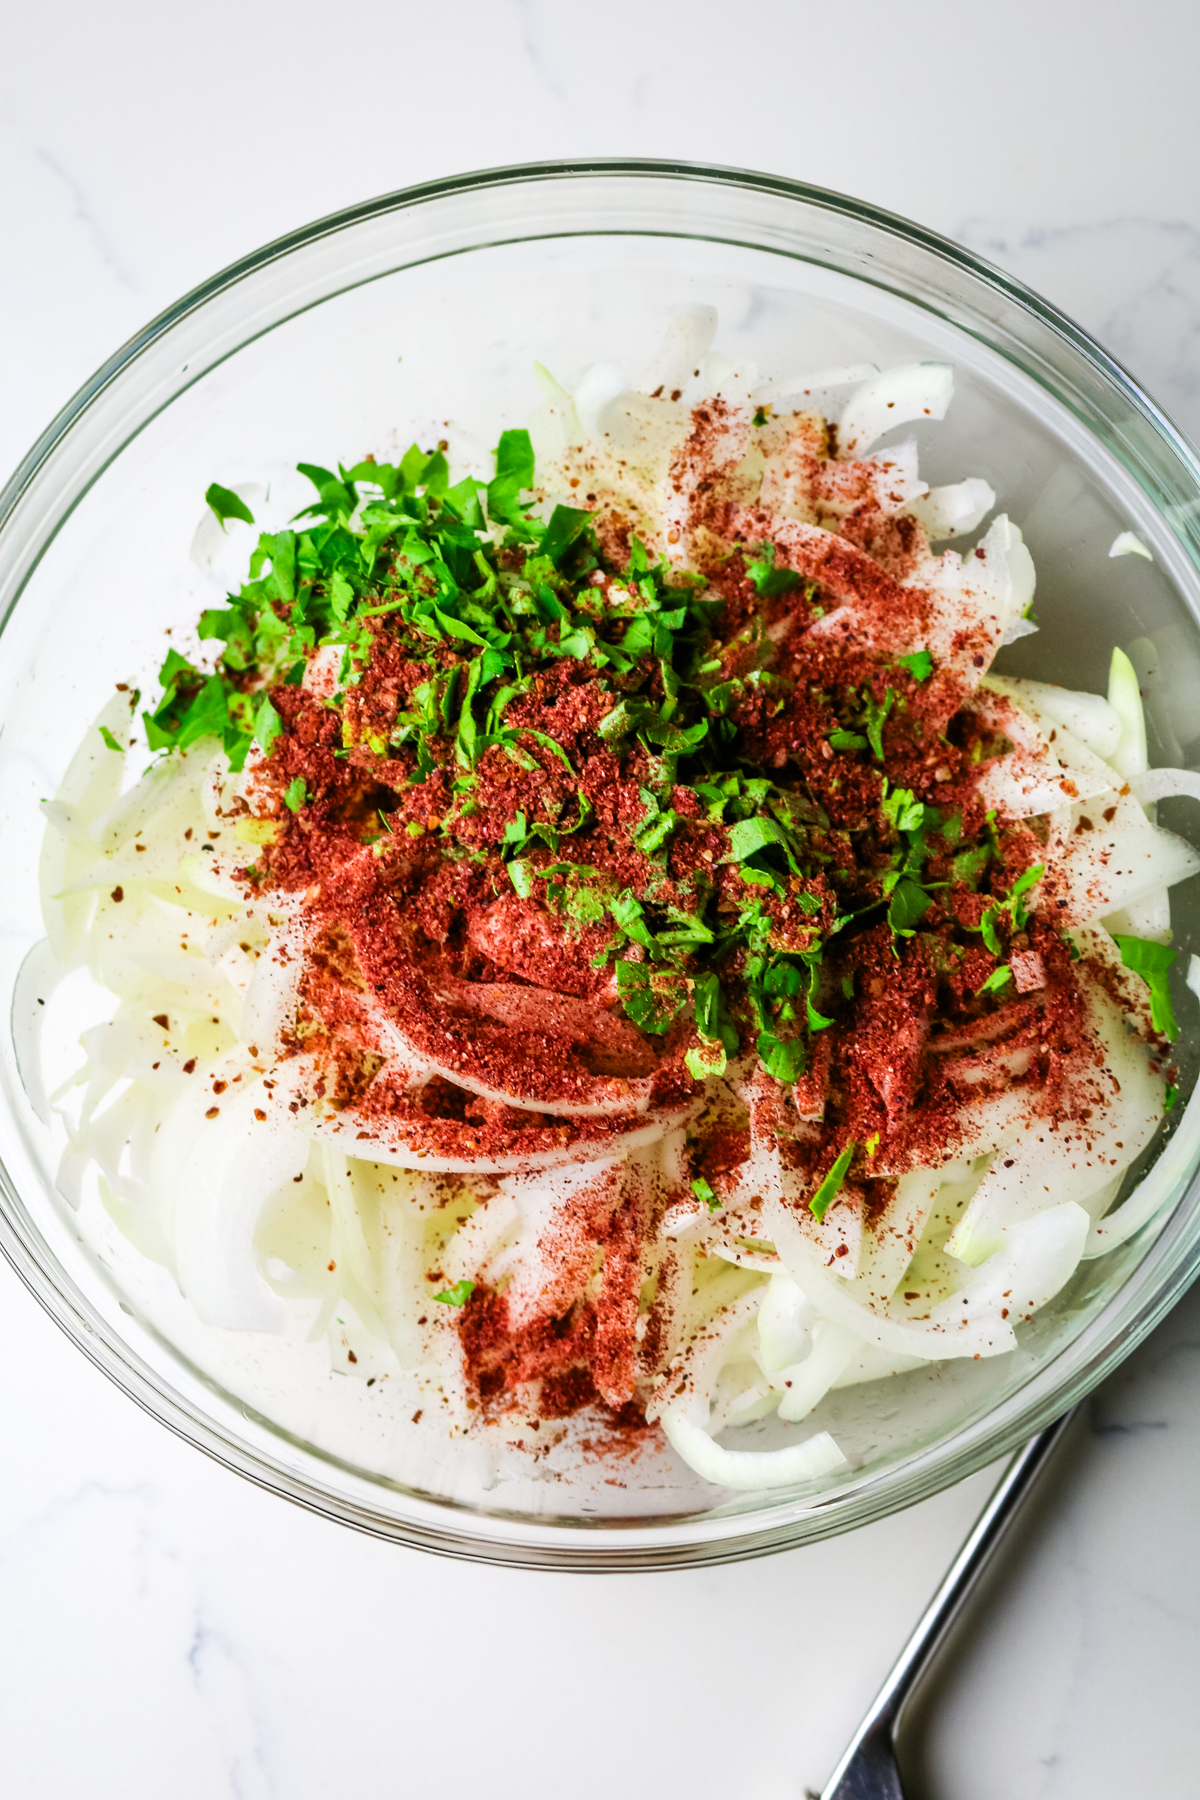 thinly sliced yellow onion with sumac seasoning and fresh parsley on top.